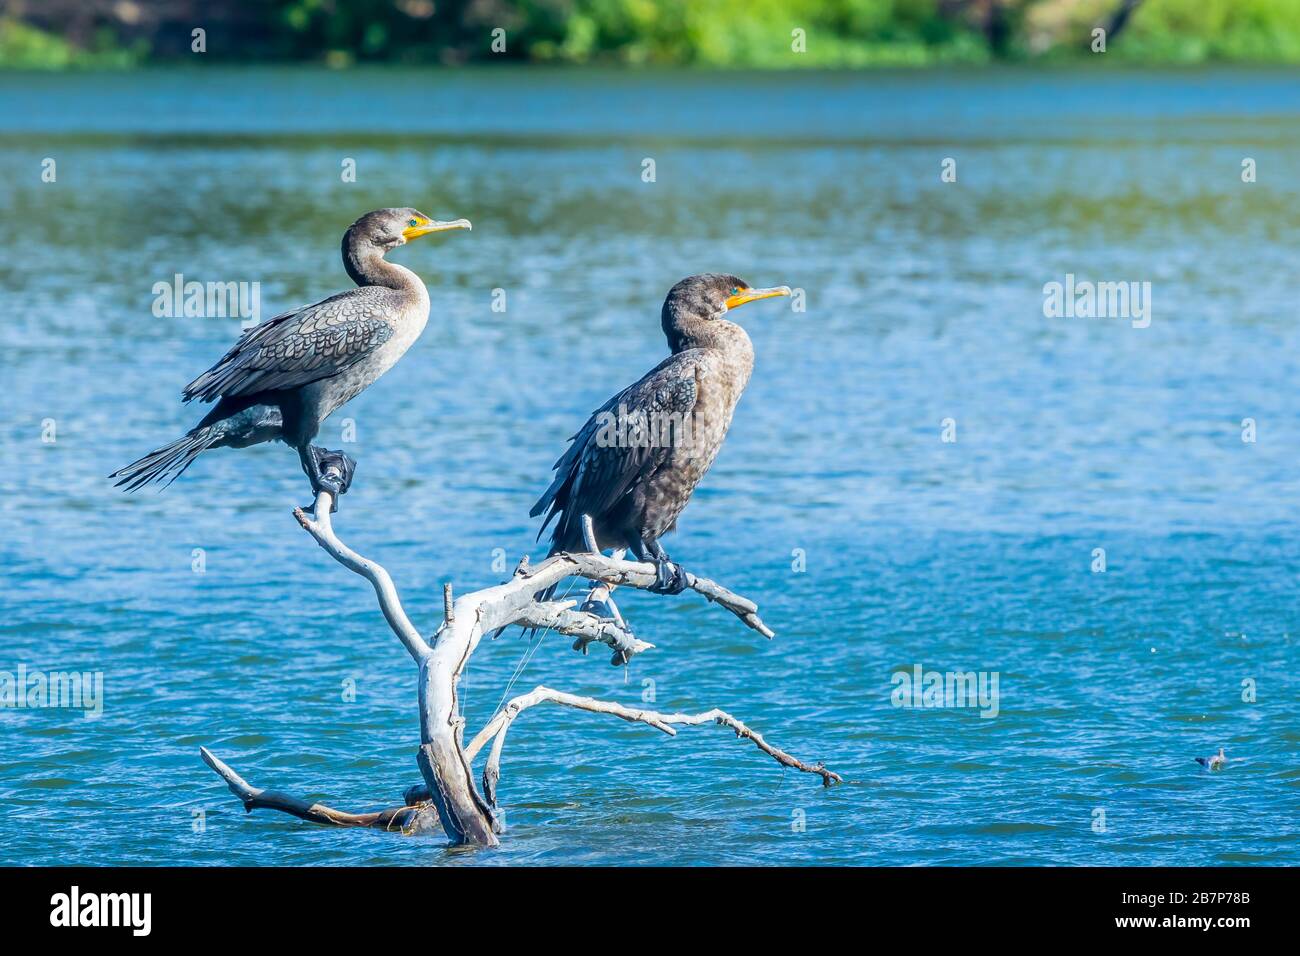 Two double crested cormorants on branch during day time Stock Photo